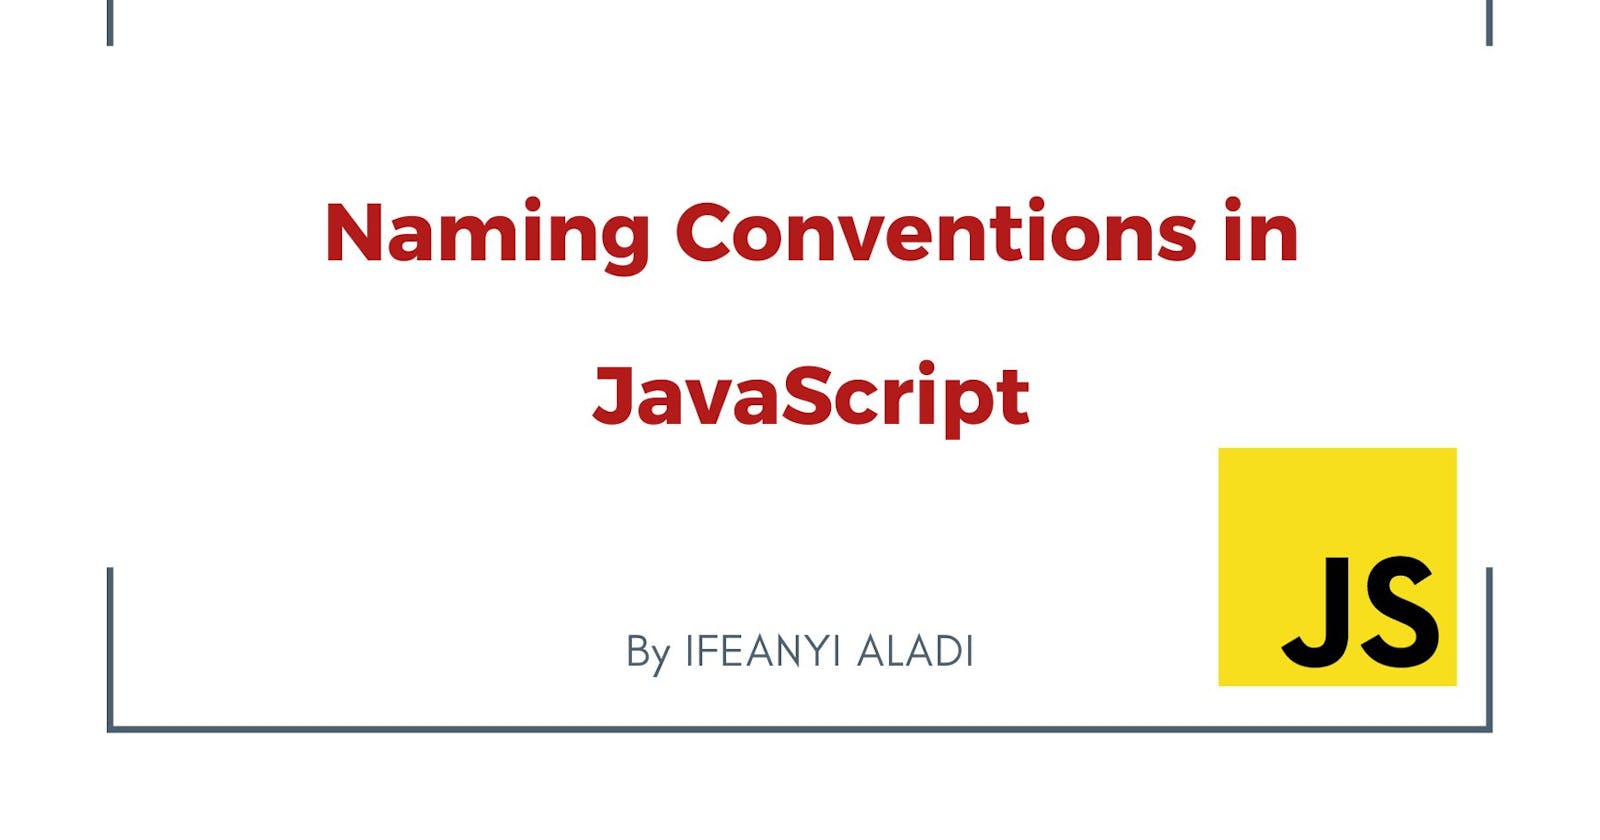 Naming Conventions in JavaScript